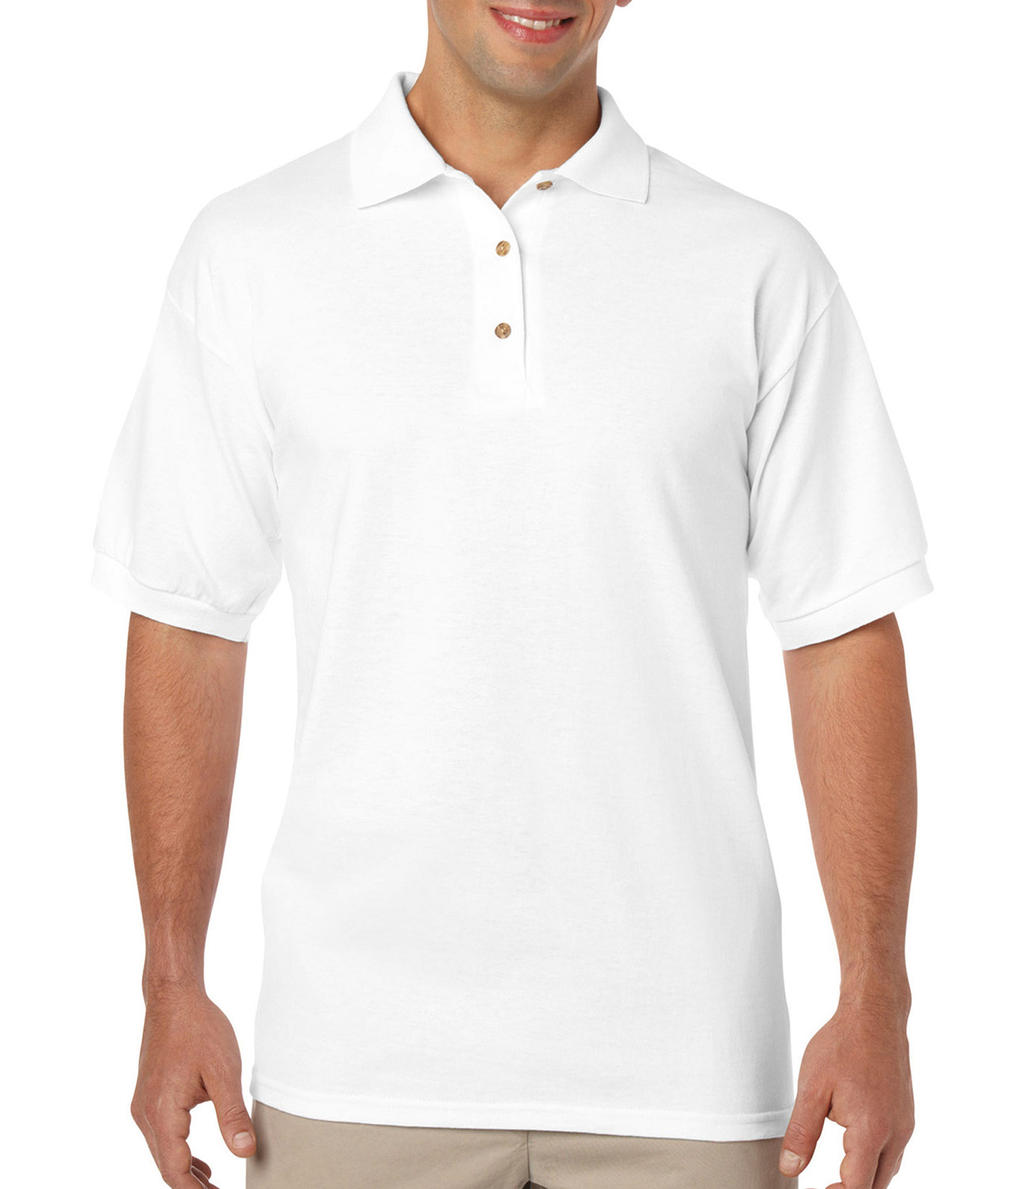  DryBlend Adult Jersey Polo in Farbe White